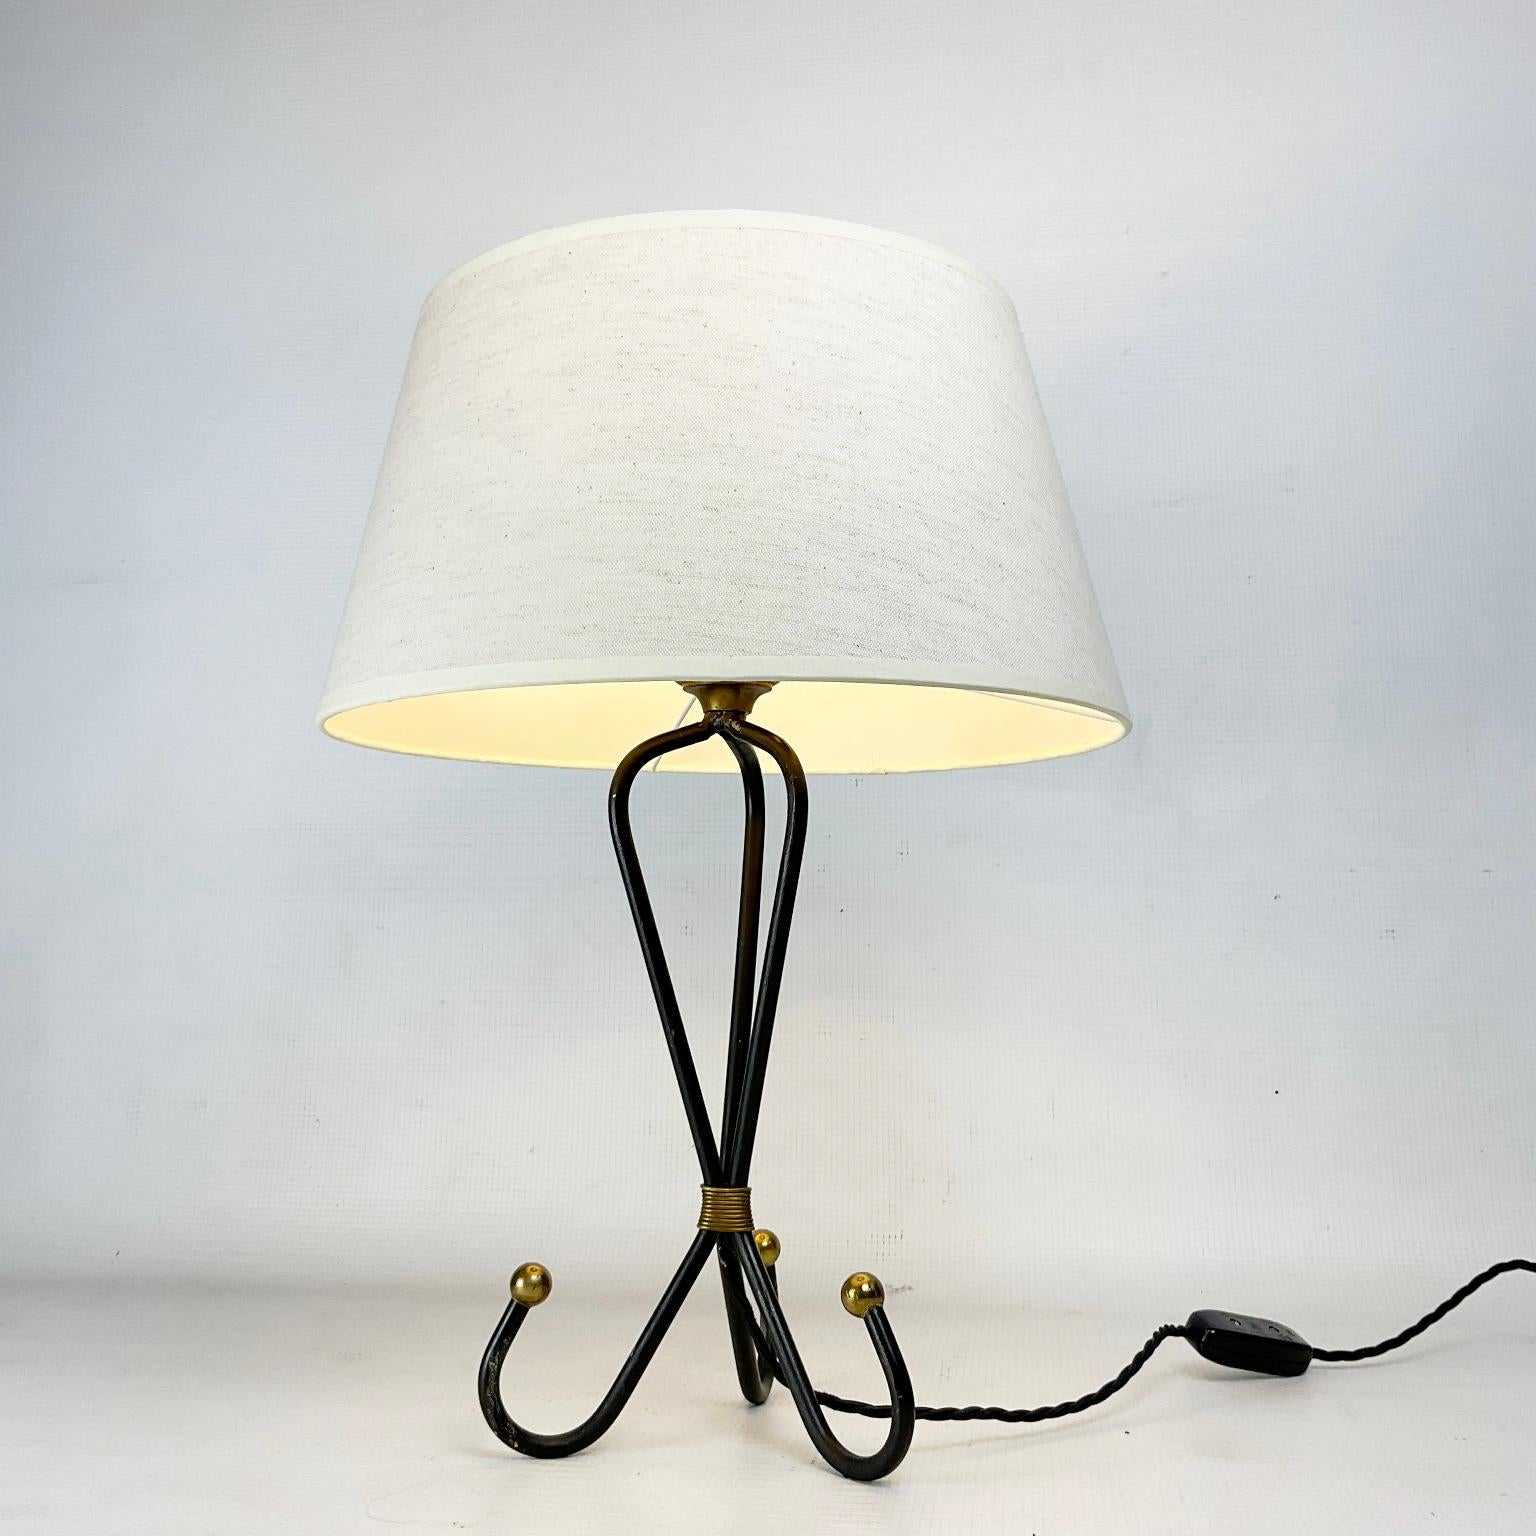 1950s Table Lamp Wrought Iron and Brass Finish 1